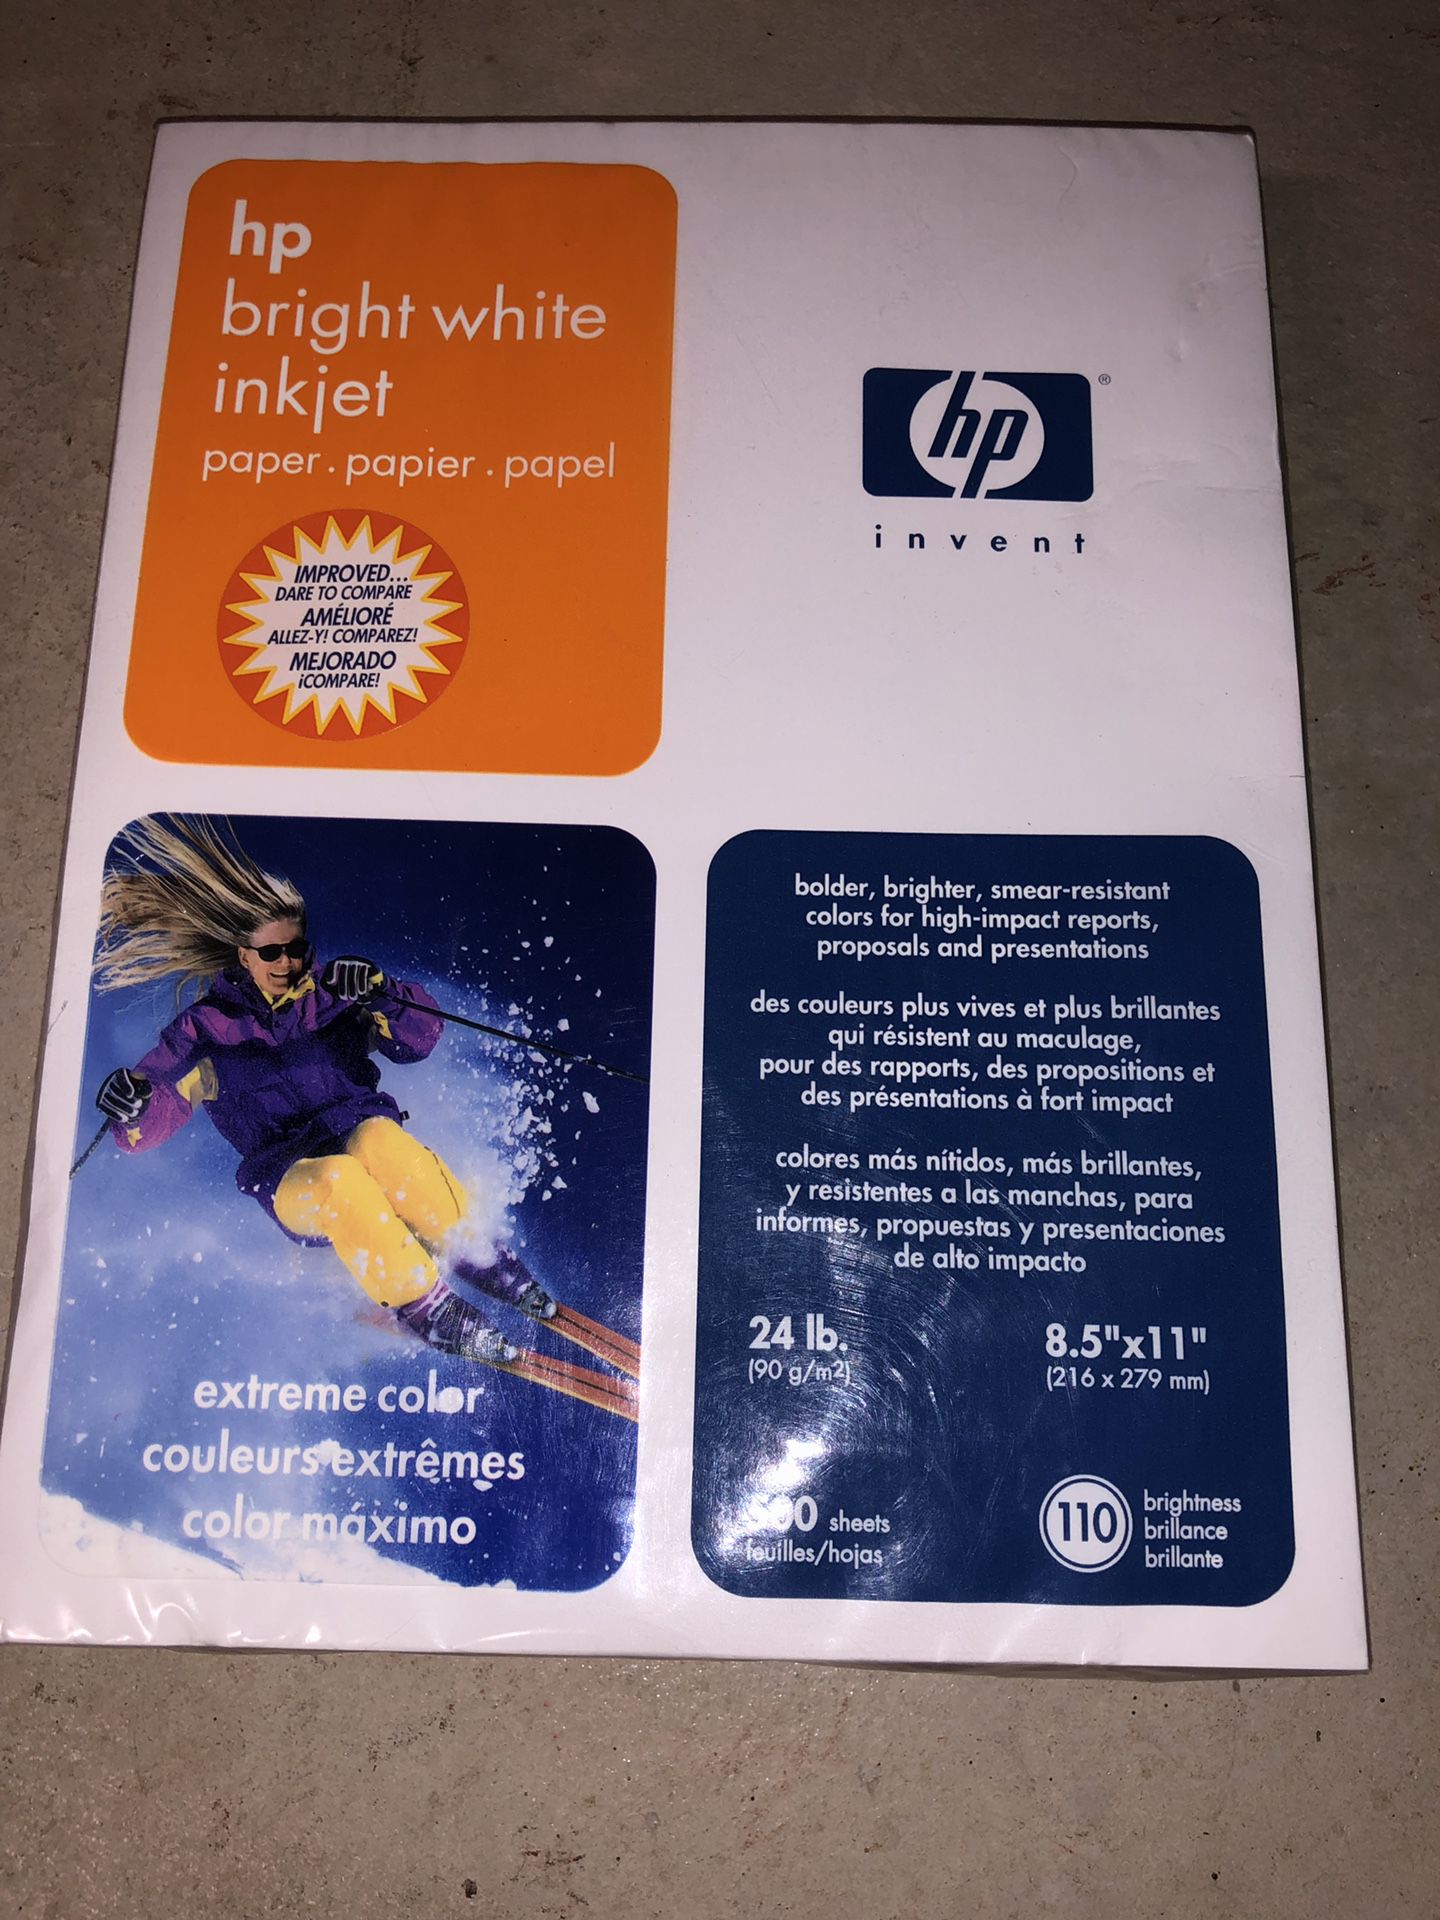 HP bright white ink jet paper, 500 sheets